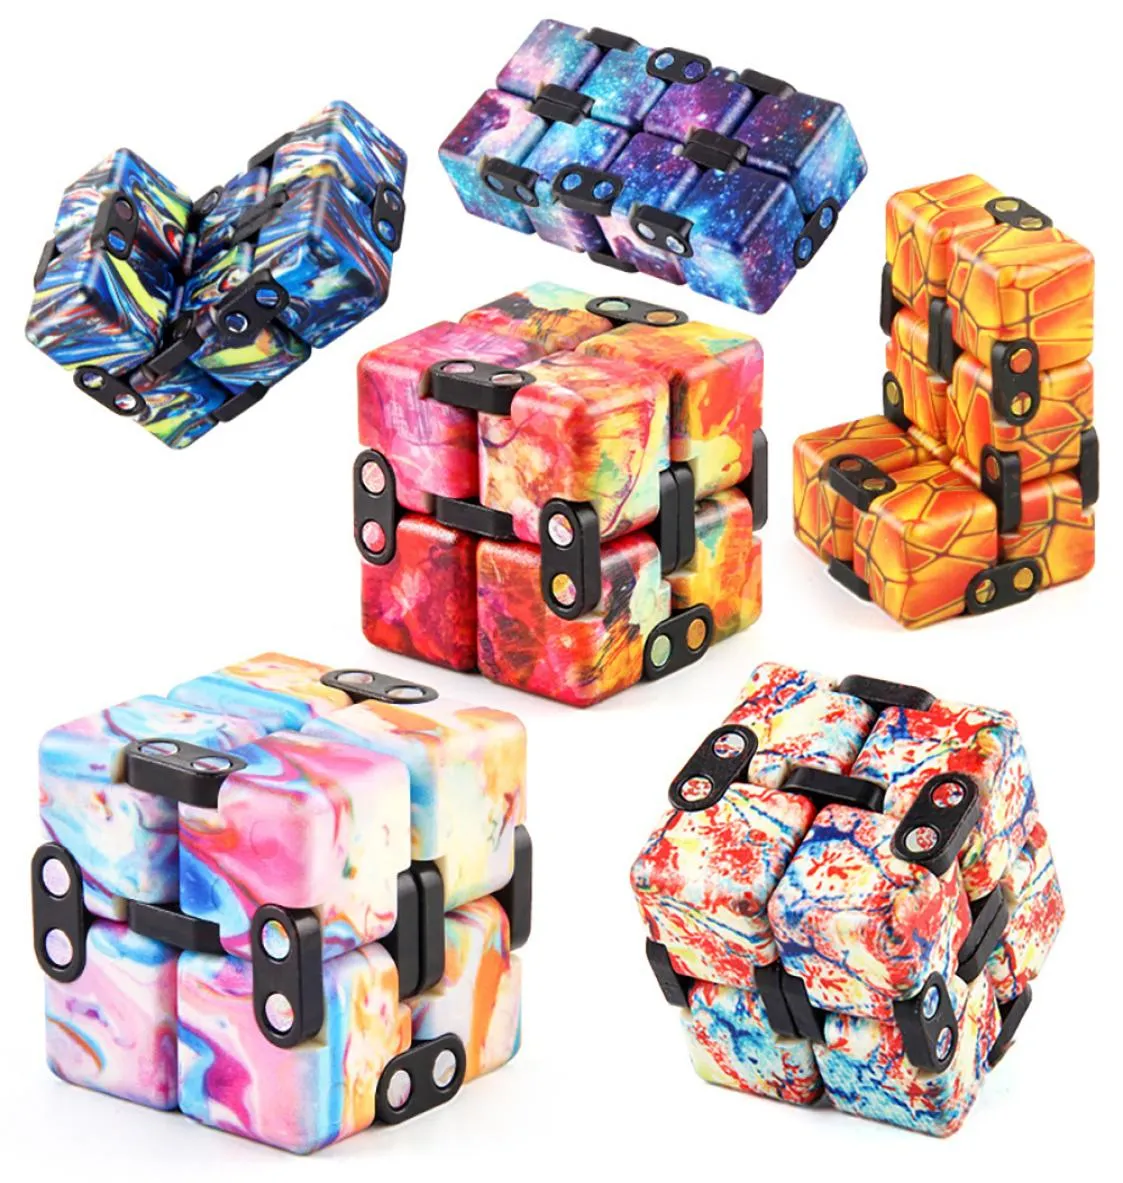 Infinity Cube Magic Square 3D Puzzle Starry Toys Anti Stress Reliever Stacking Sensory Games Easter Birthday Presents for Adults Children Barn Boys Girls3389744